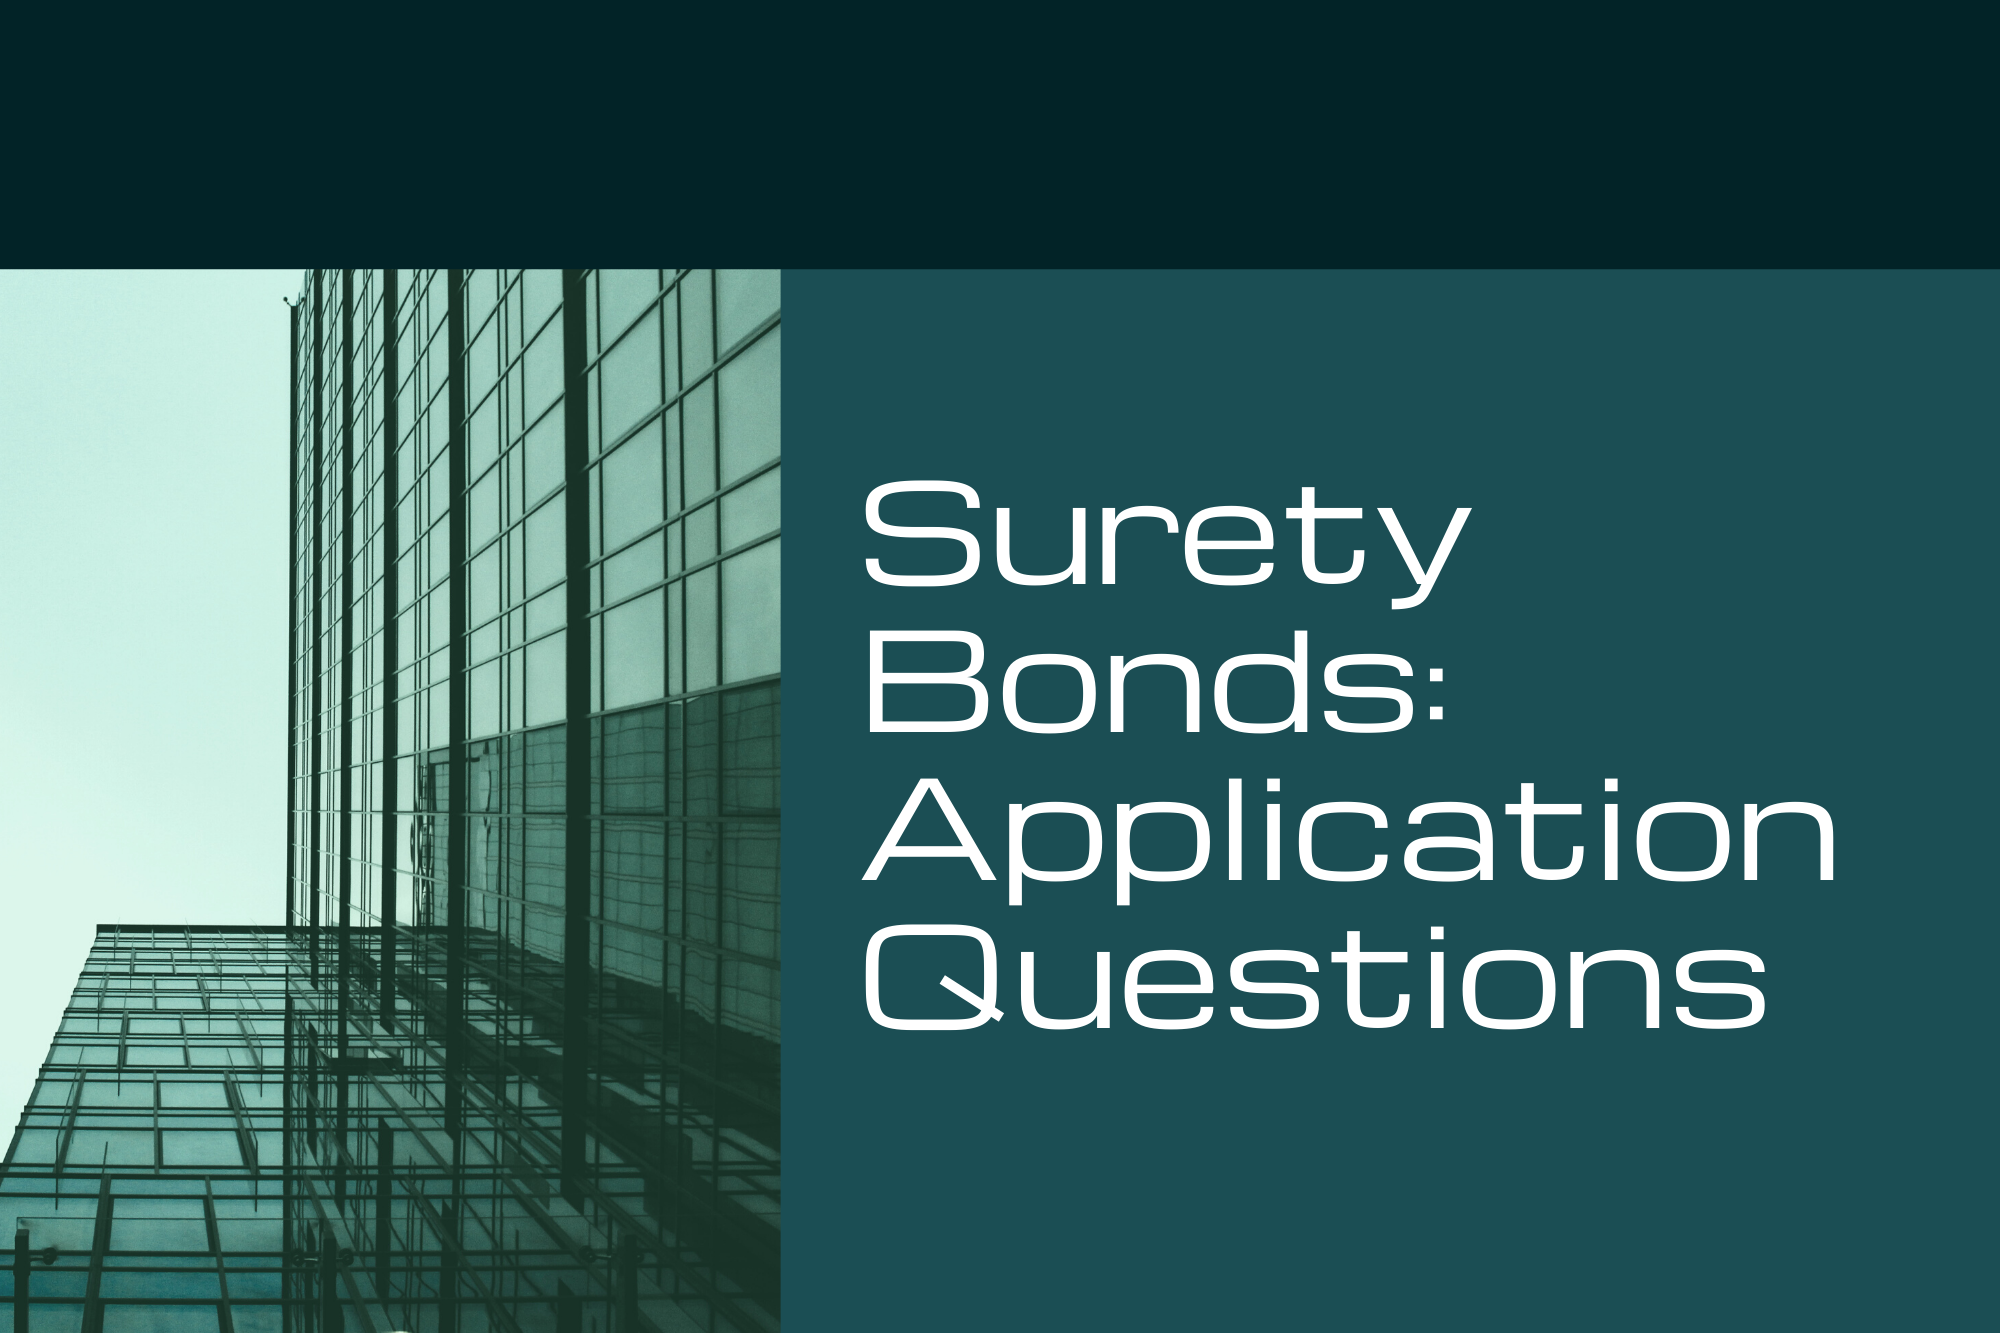 surety bonds - what is the process to get a surety bond - building interior in blue green background